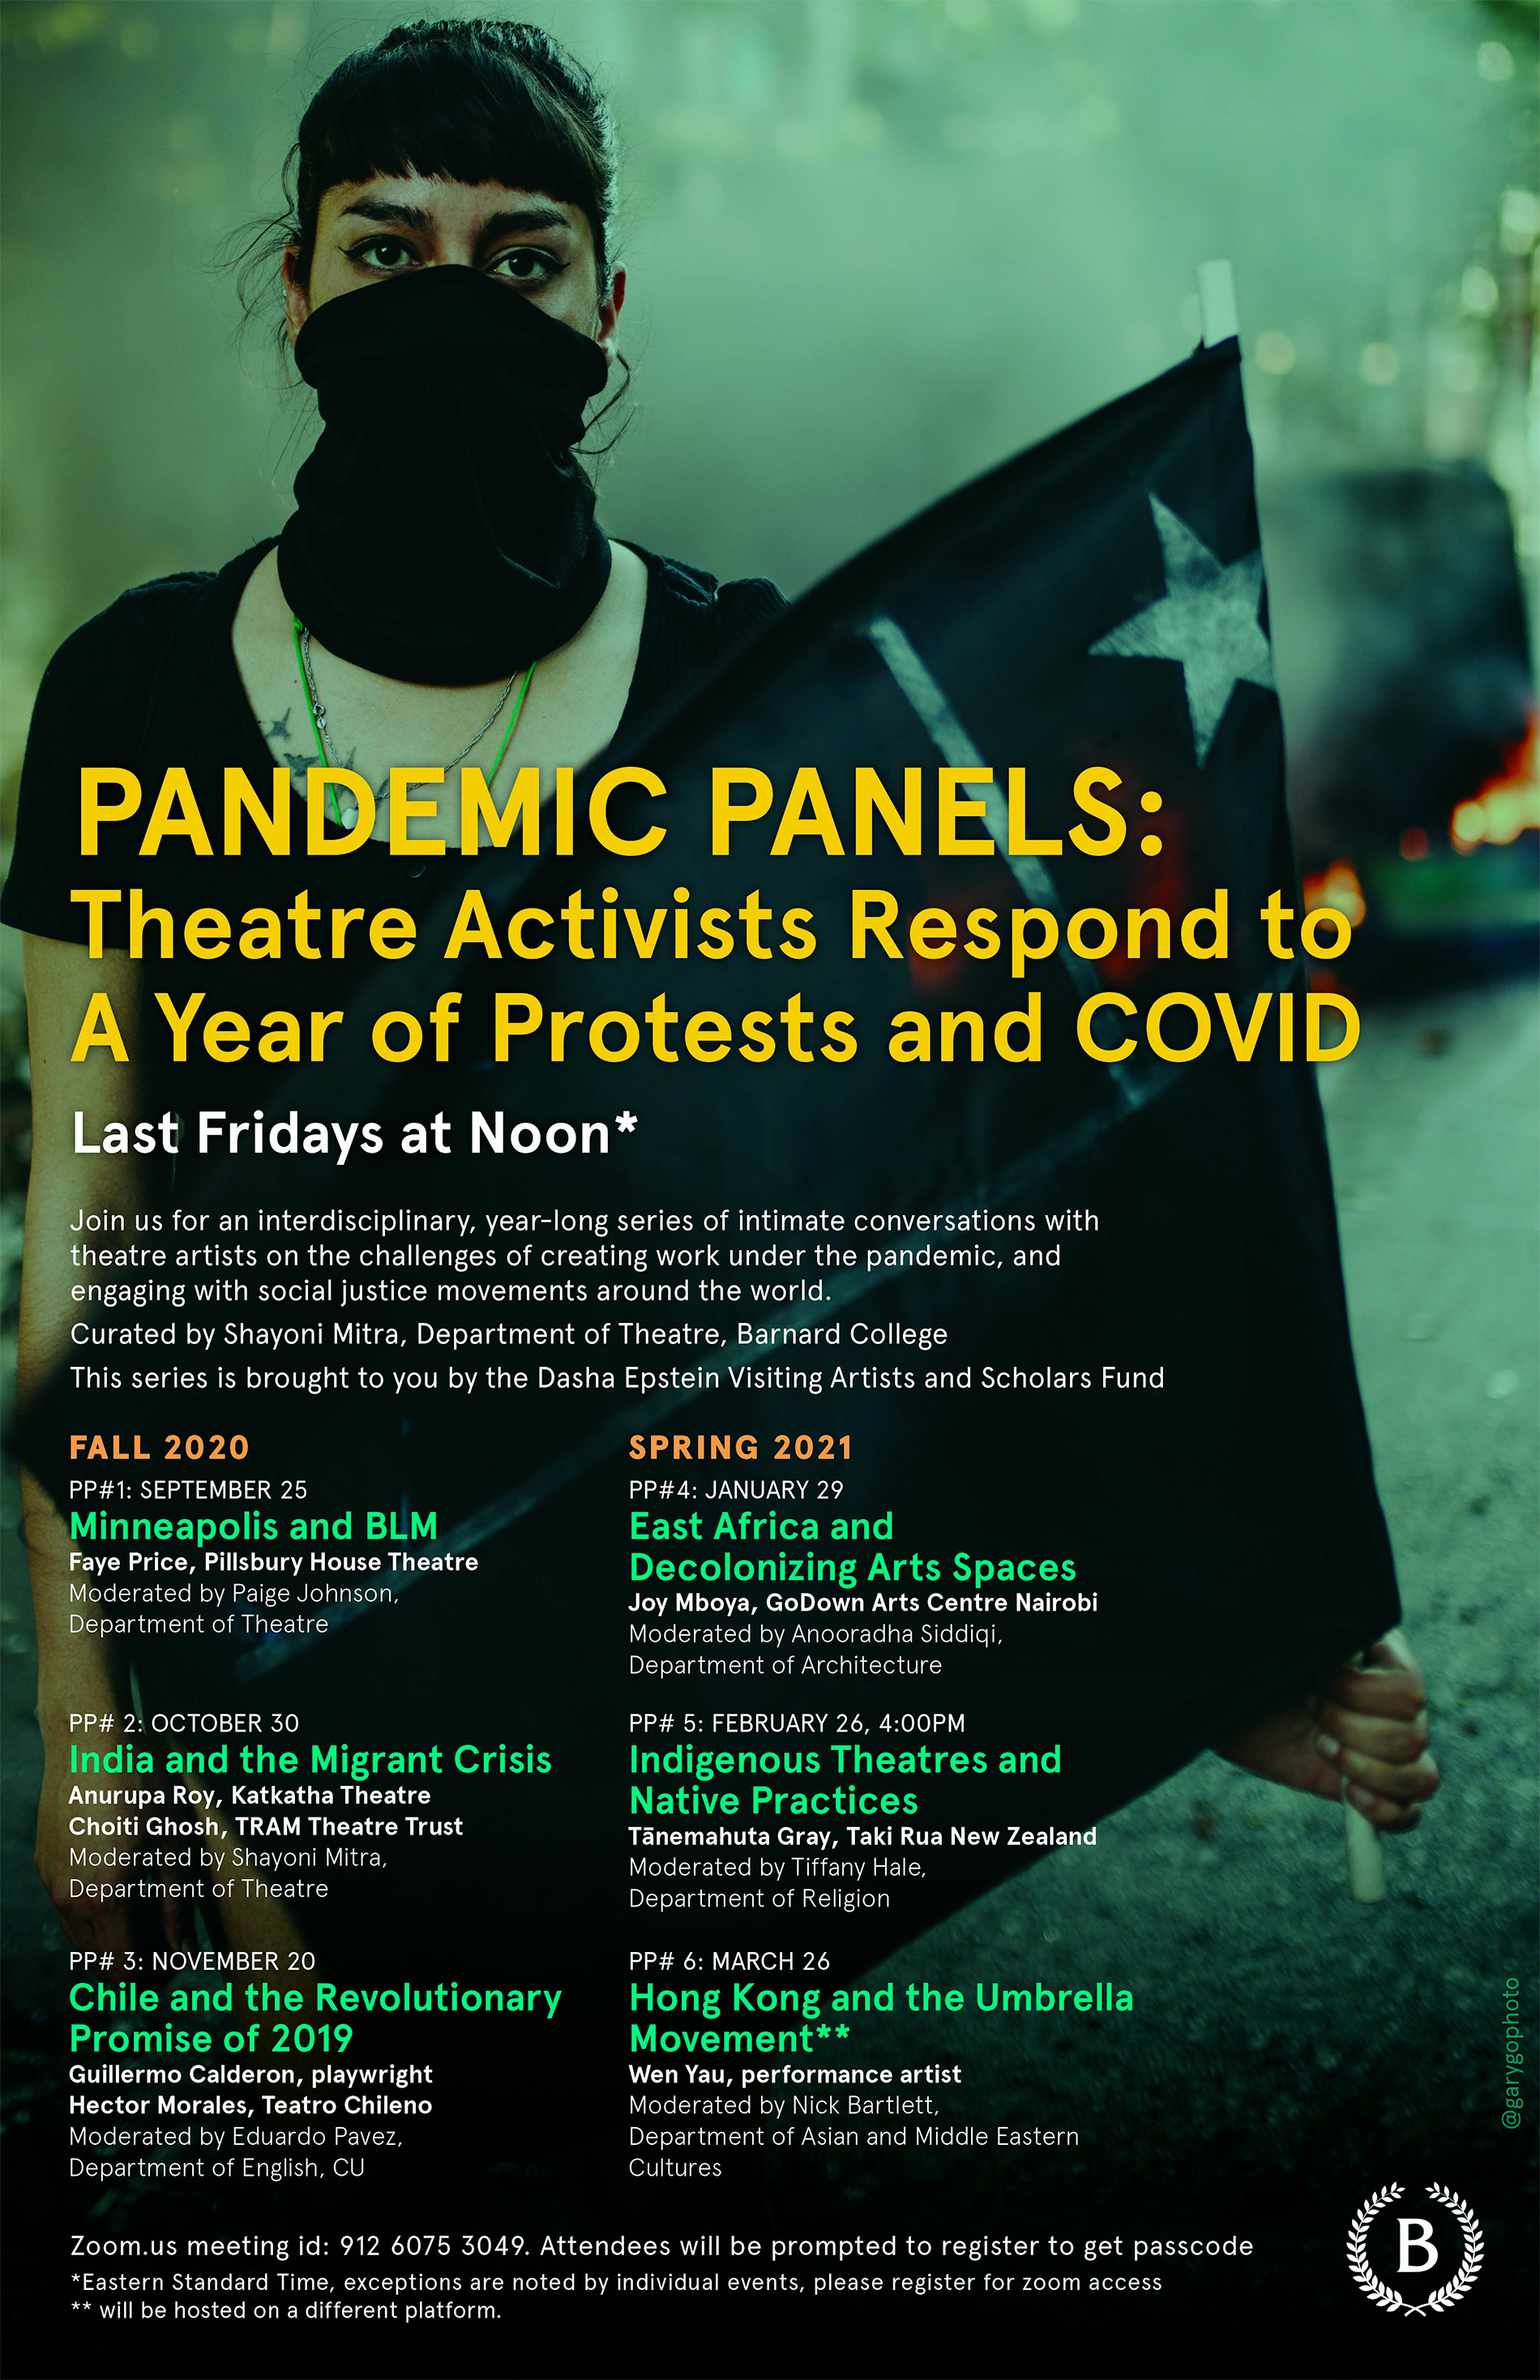 Pandemic panels event poster